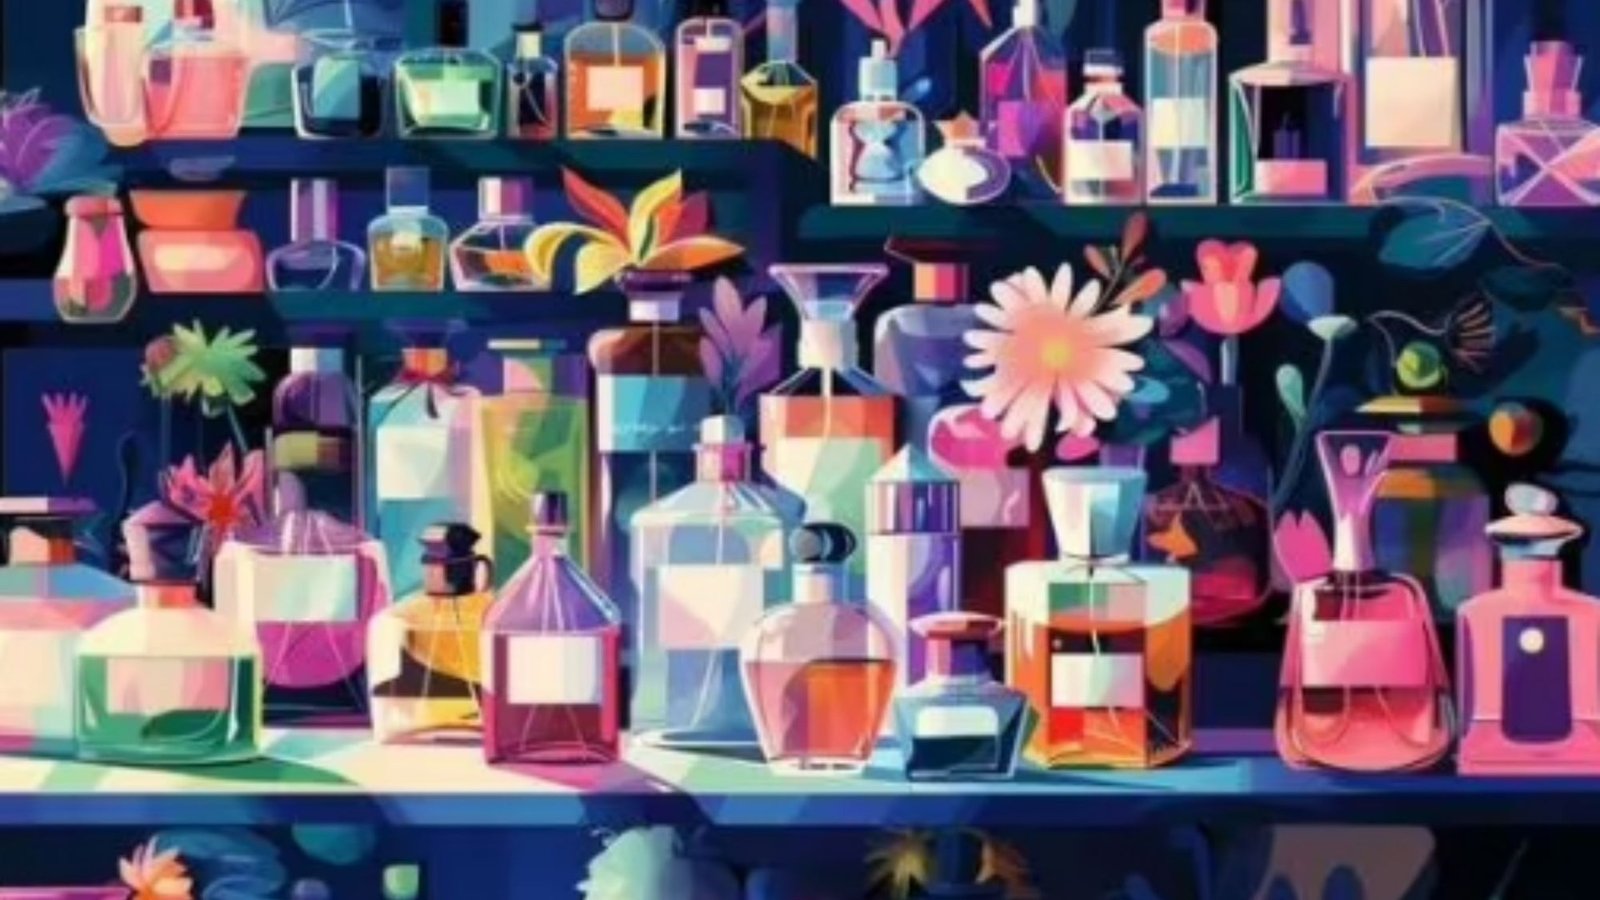 Everyone can see the perfume bottles but only those with high IQ can spot the hidden lipstick in 10 seconds